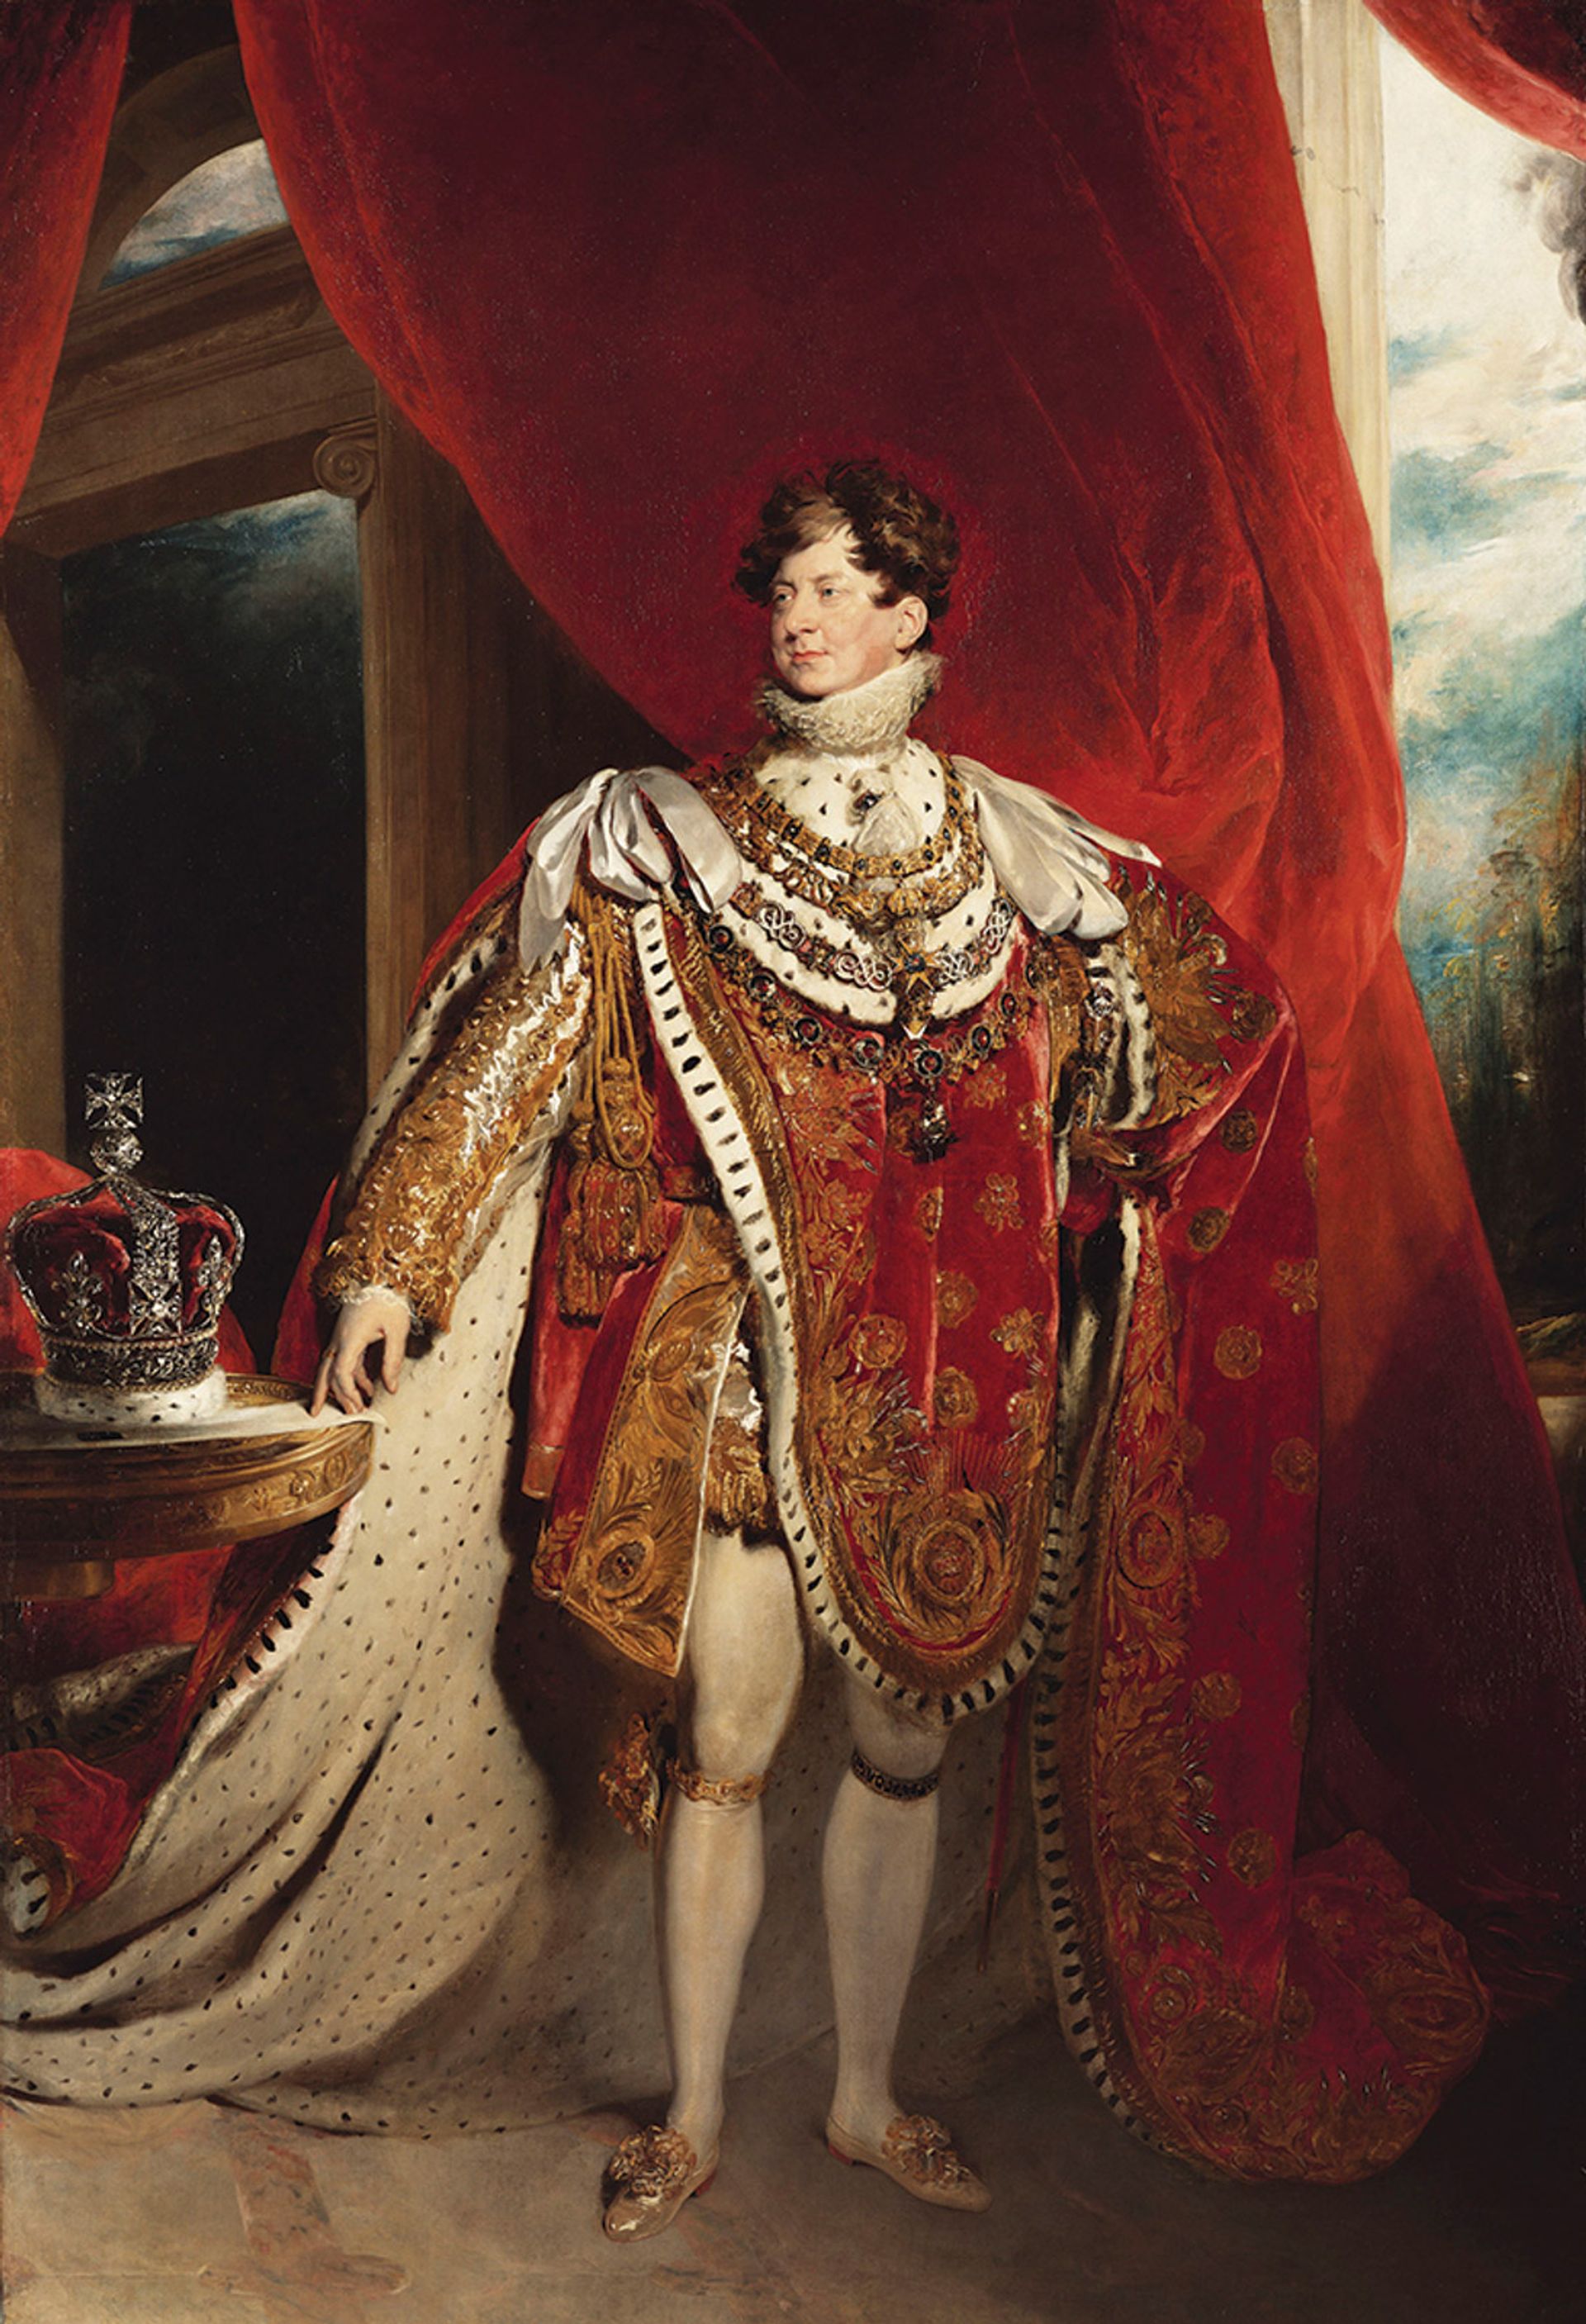 Thomas Lawrence’s portrait of George IV (1821) shows the monarch wearing the coronation mantle he designed himself Royal Collection Trust; © Her Majesty Queen Elizabeth II 2019